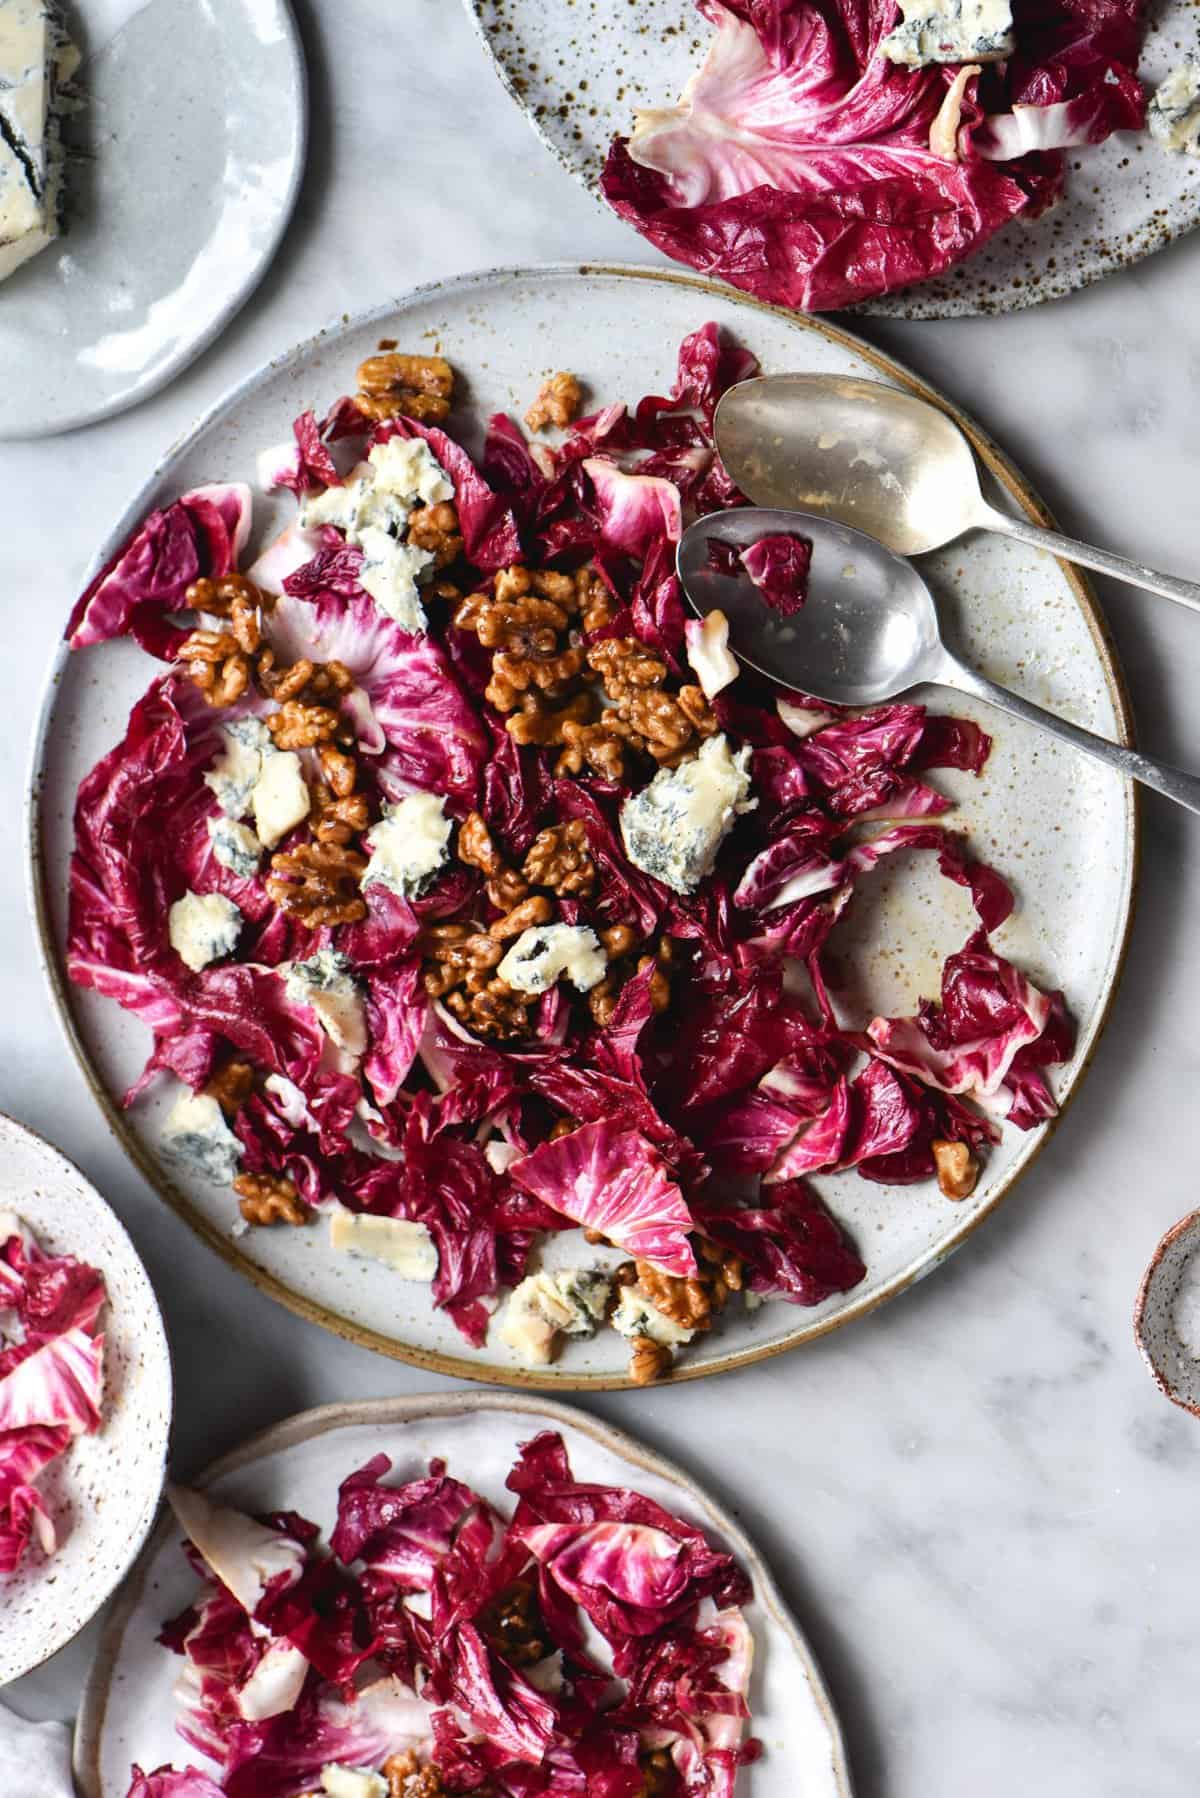 Radicchio salad with blue cheese, honey cinnamon walnuts and a sherry vinaigrette on a white marble backdrop